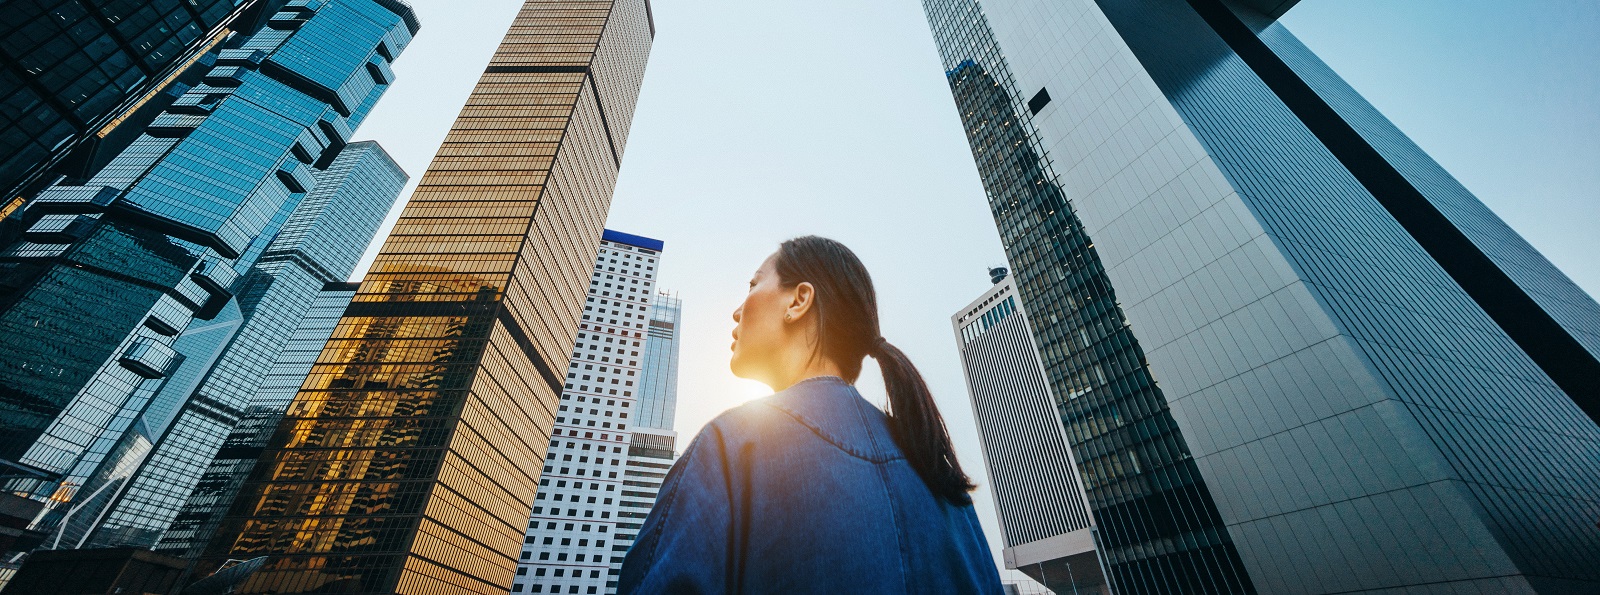 Low angle view of woman standing against modern skyscrapers and blue sky in city at sunrise